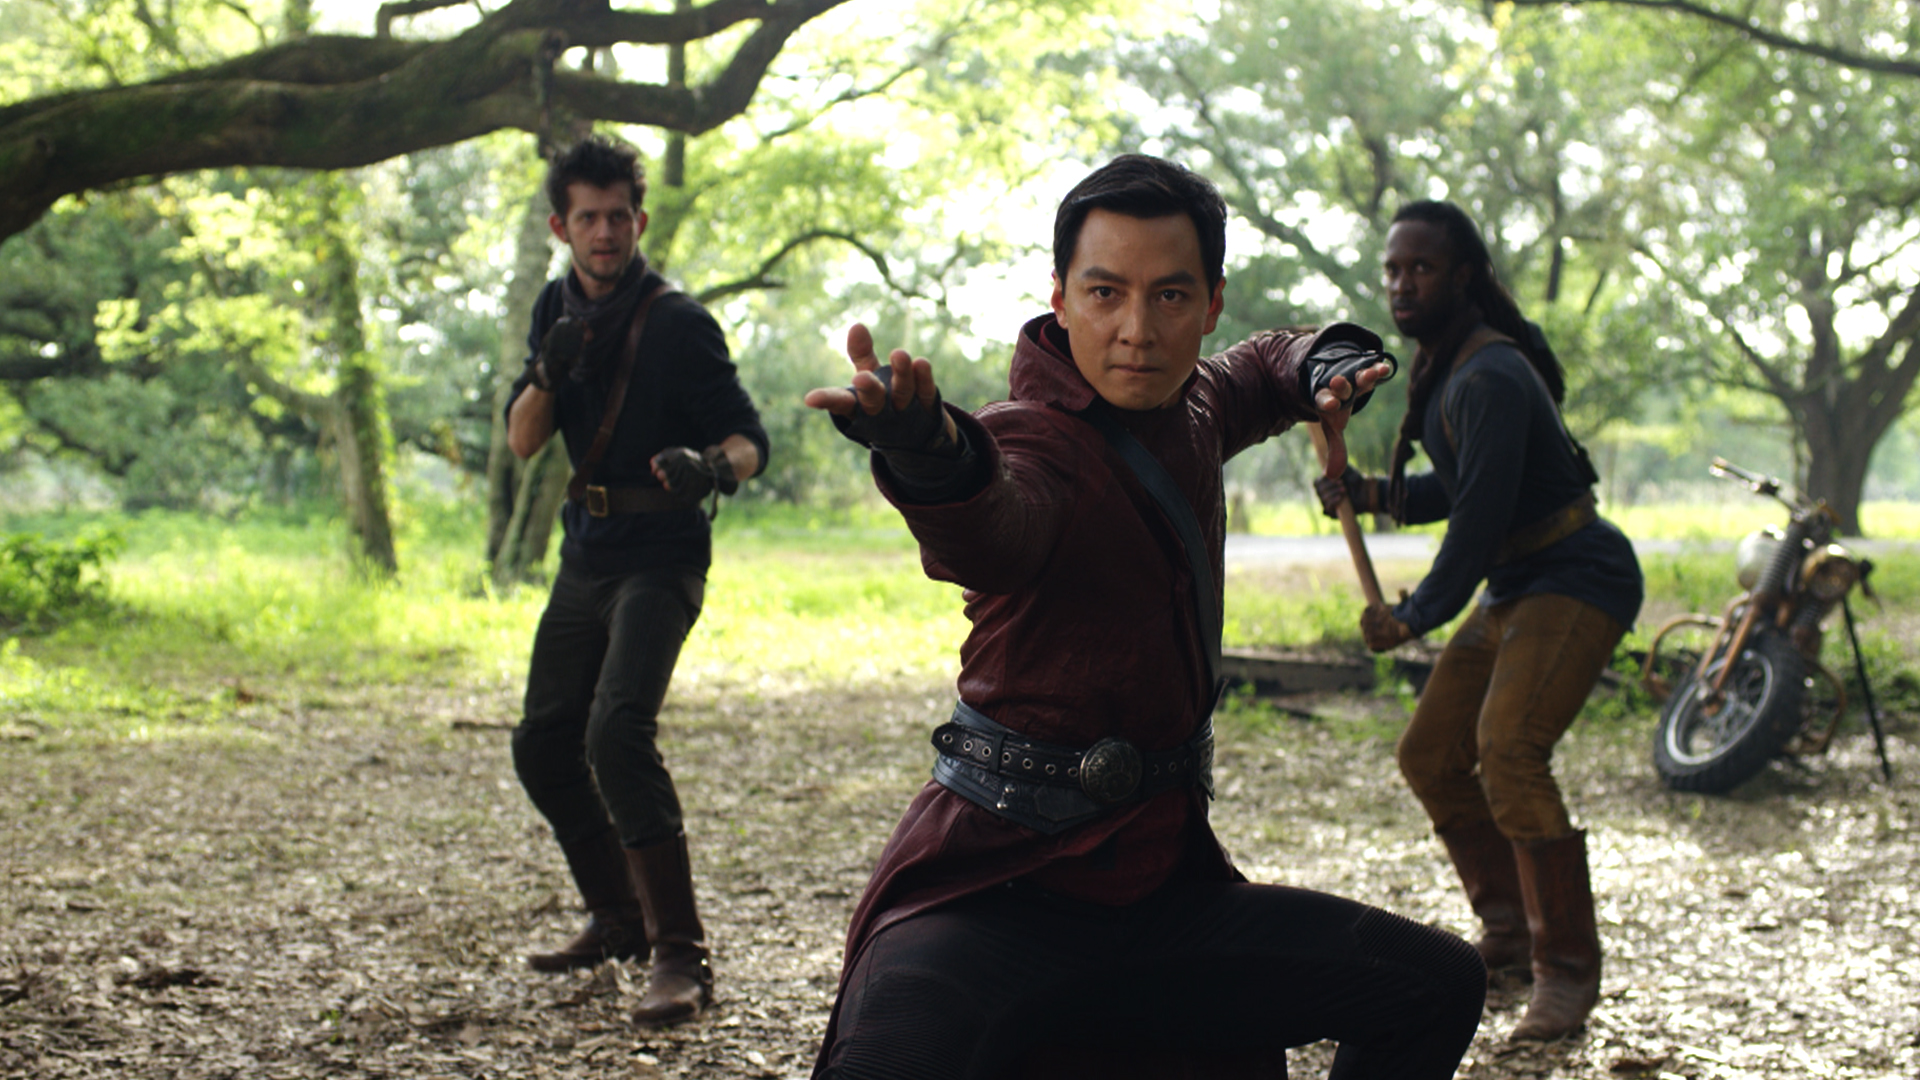 Official Trailer: Into the Badlands, Catch a look at the new AMC Original Series, Into the Badlands. Series Premiere Sunday November 15 at 10/9c. Only on AMC.